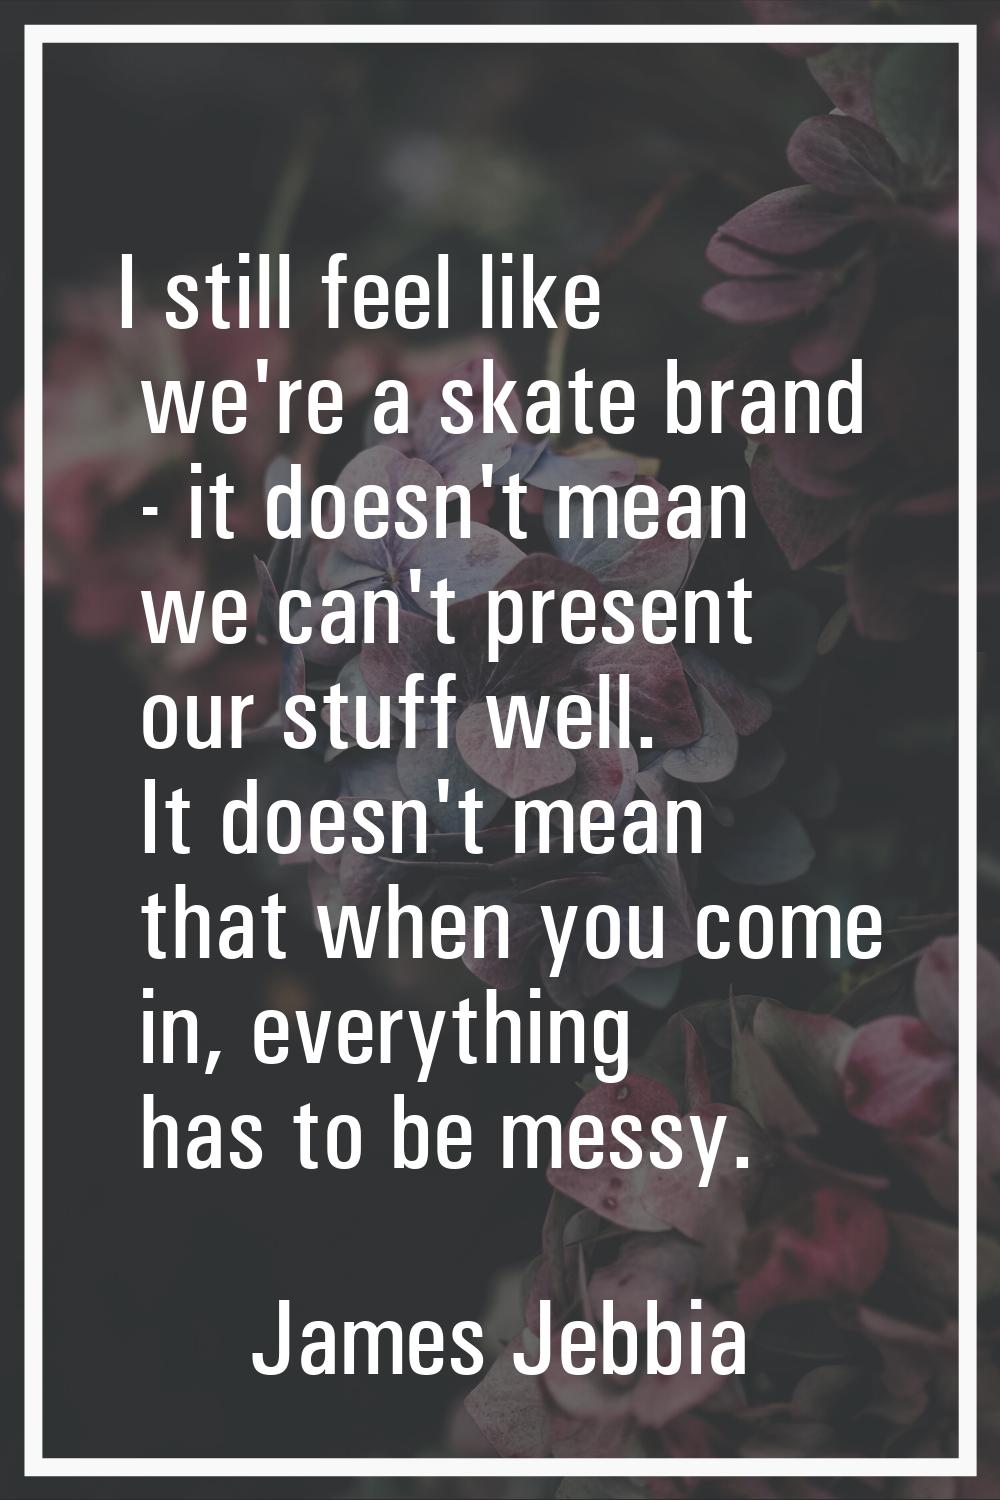 I still feel like we're a skate brand - it doesn't mean we can't present our stuff well. It doesn't